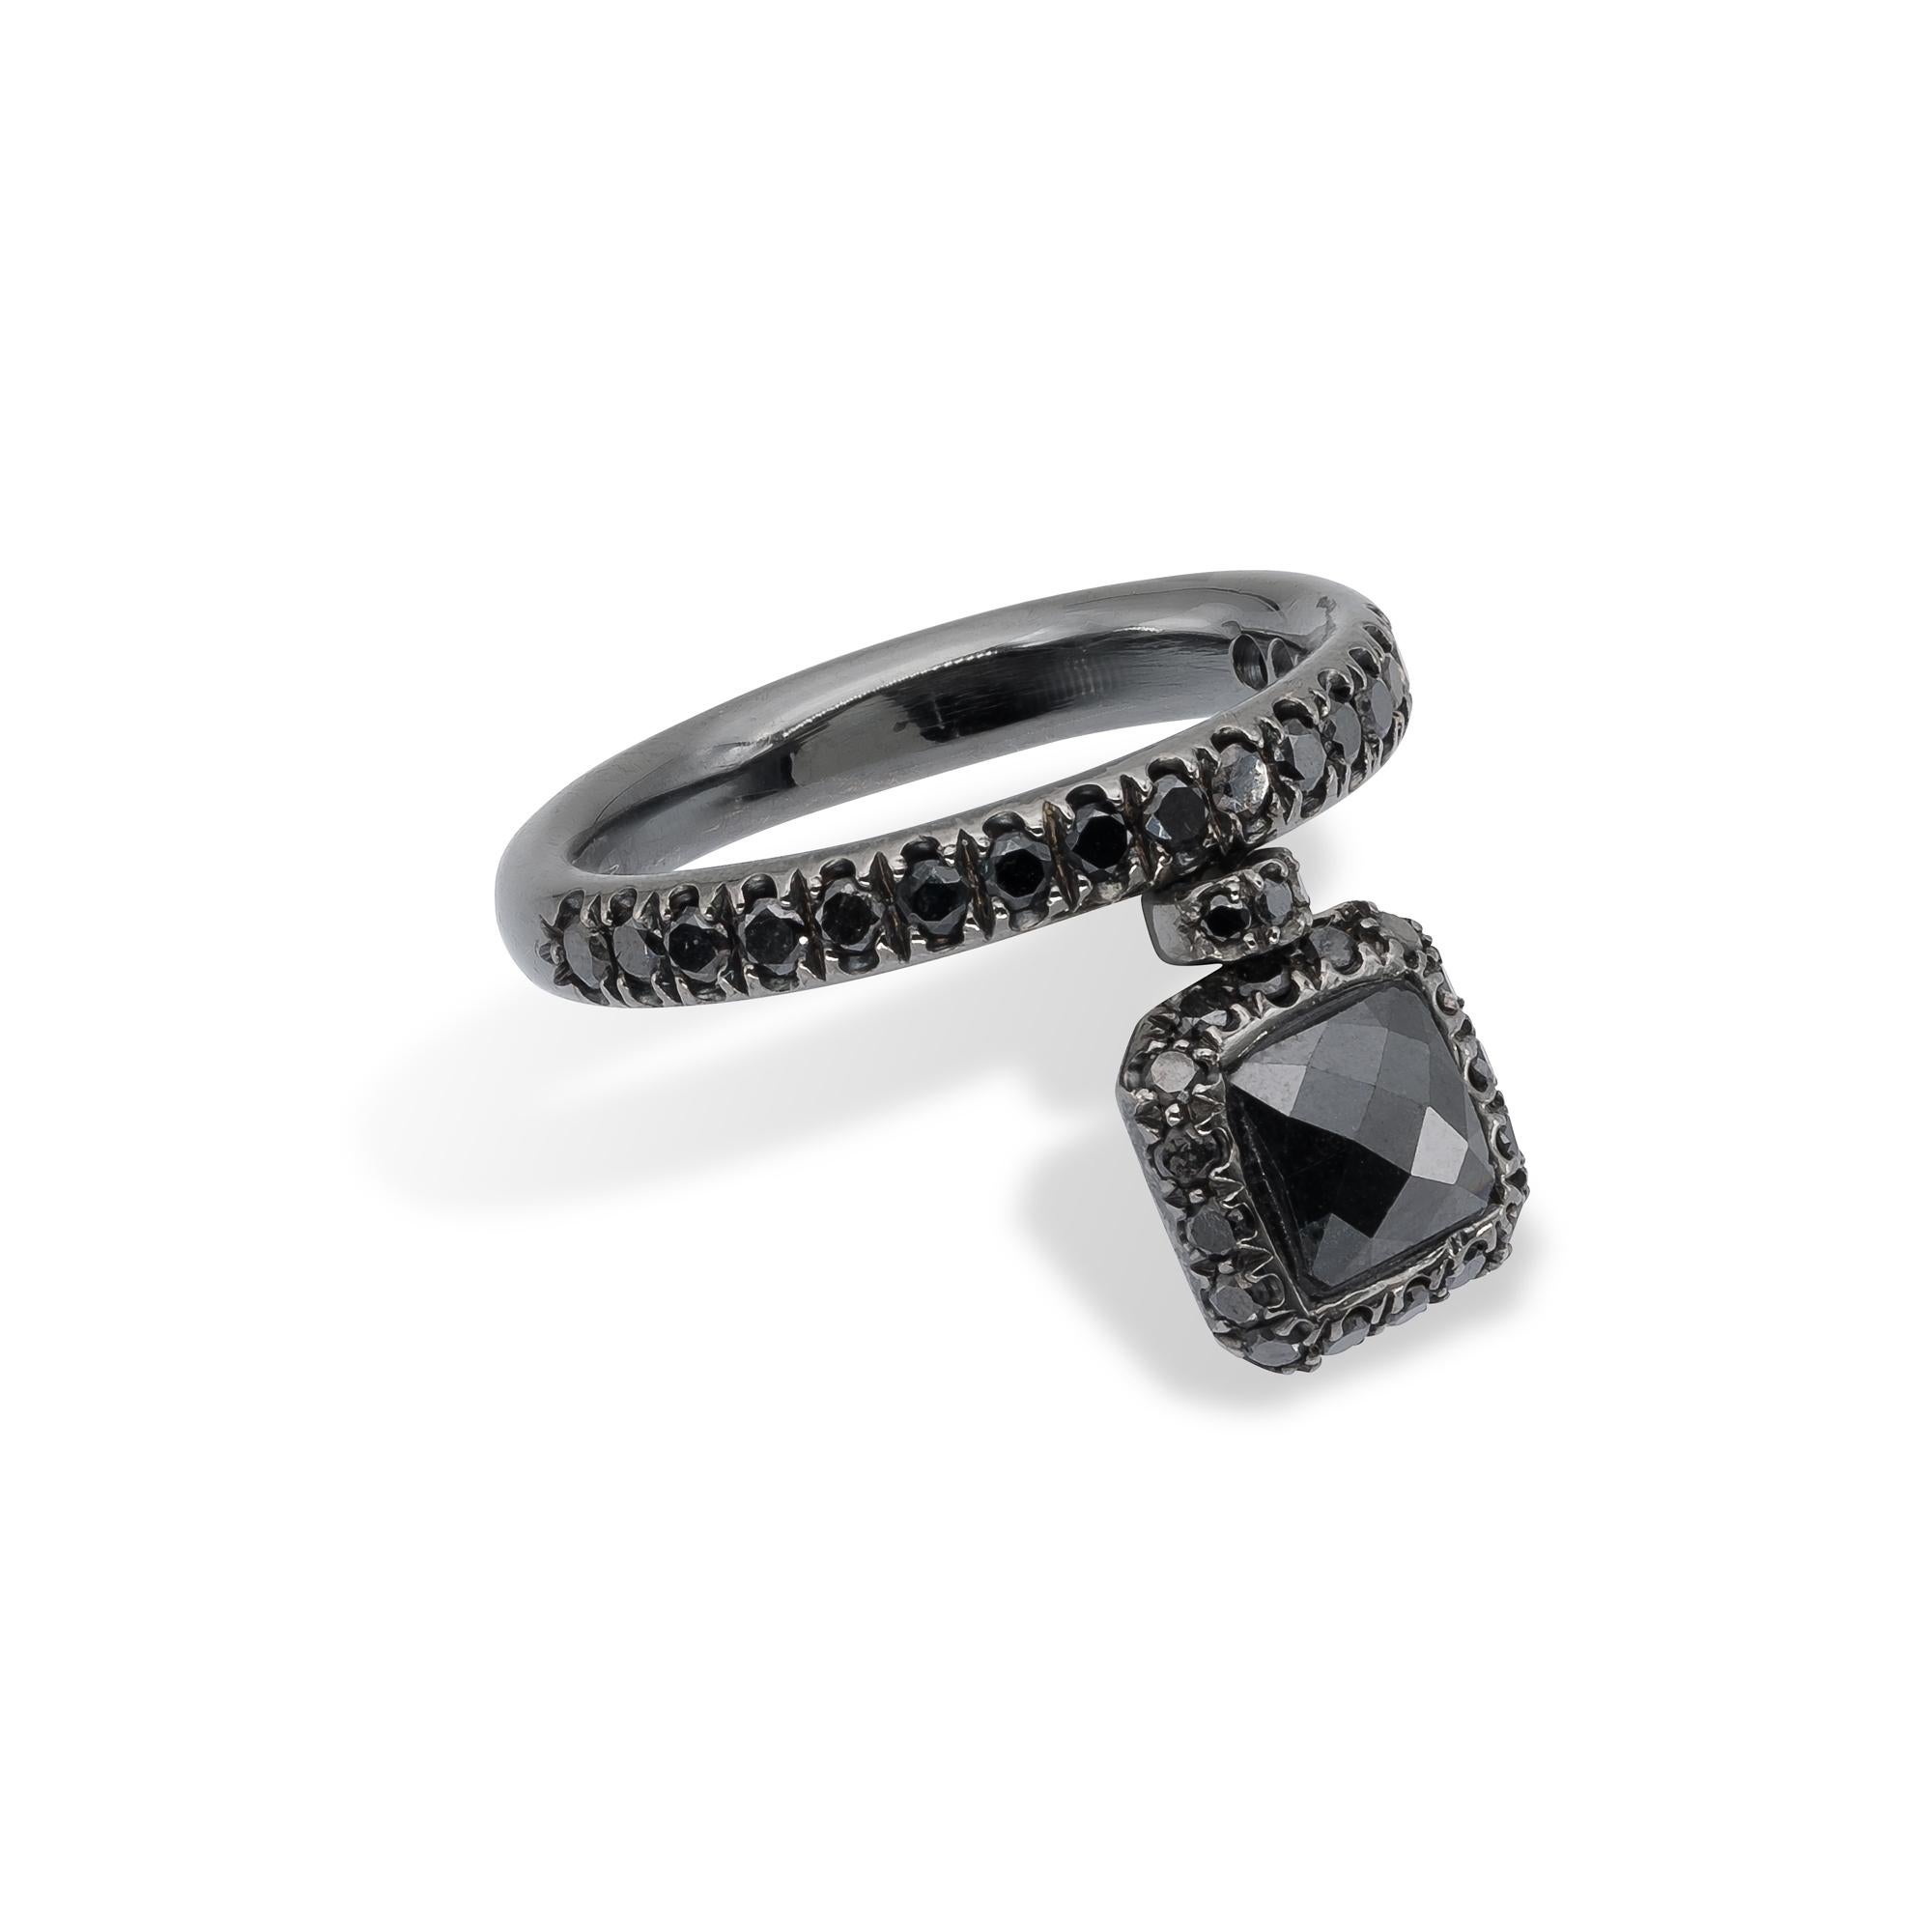 Pear Cut 1.28 carats Square Black Diamond Ring from d'Avossa Starry Night Collection For Sale